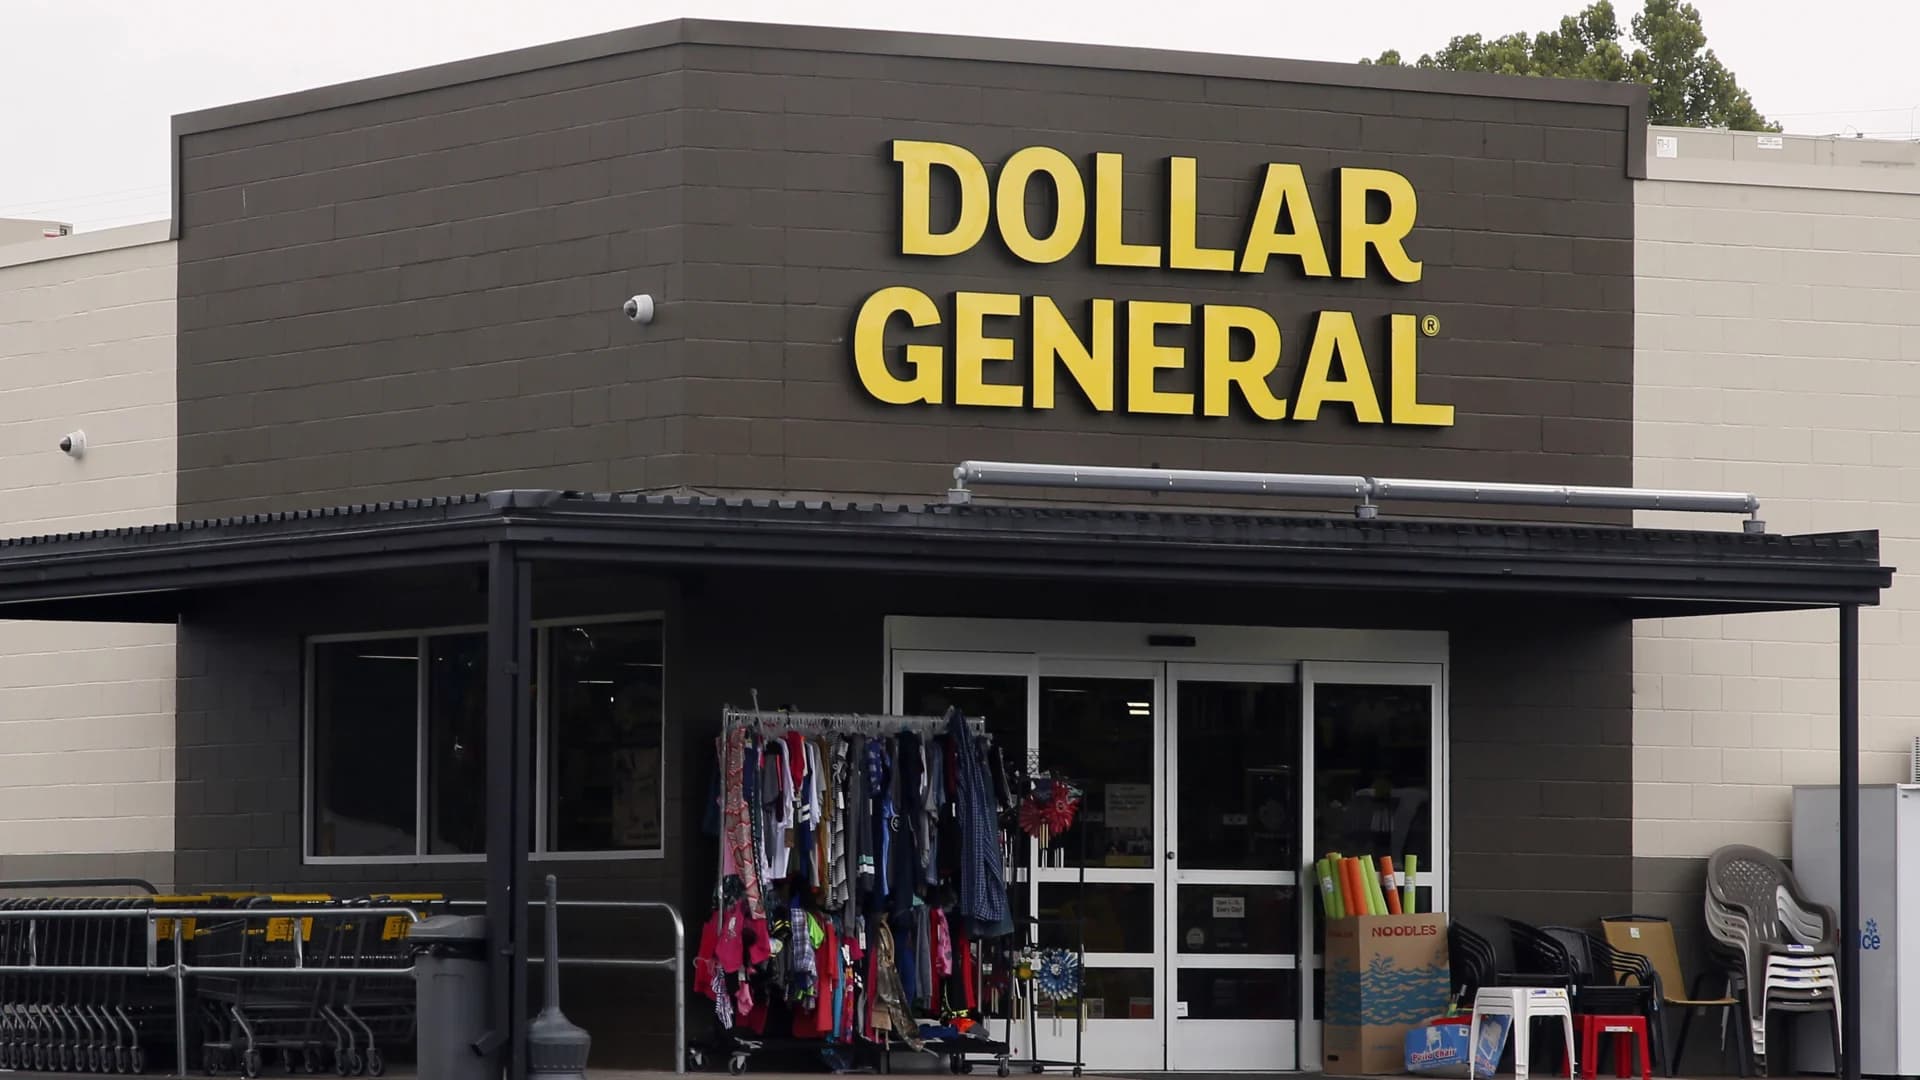 Dollar General violated worker rights and federal law in efforts to quell unionization at a Connecticut store